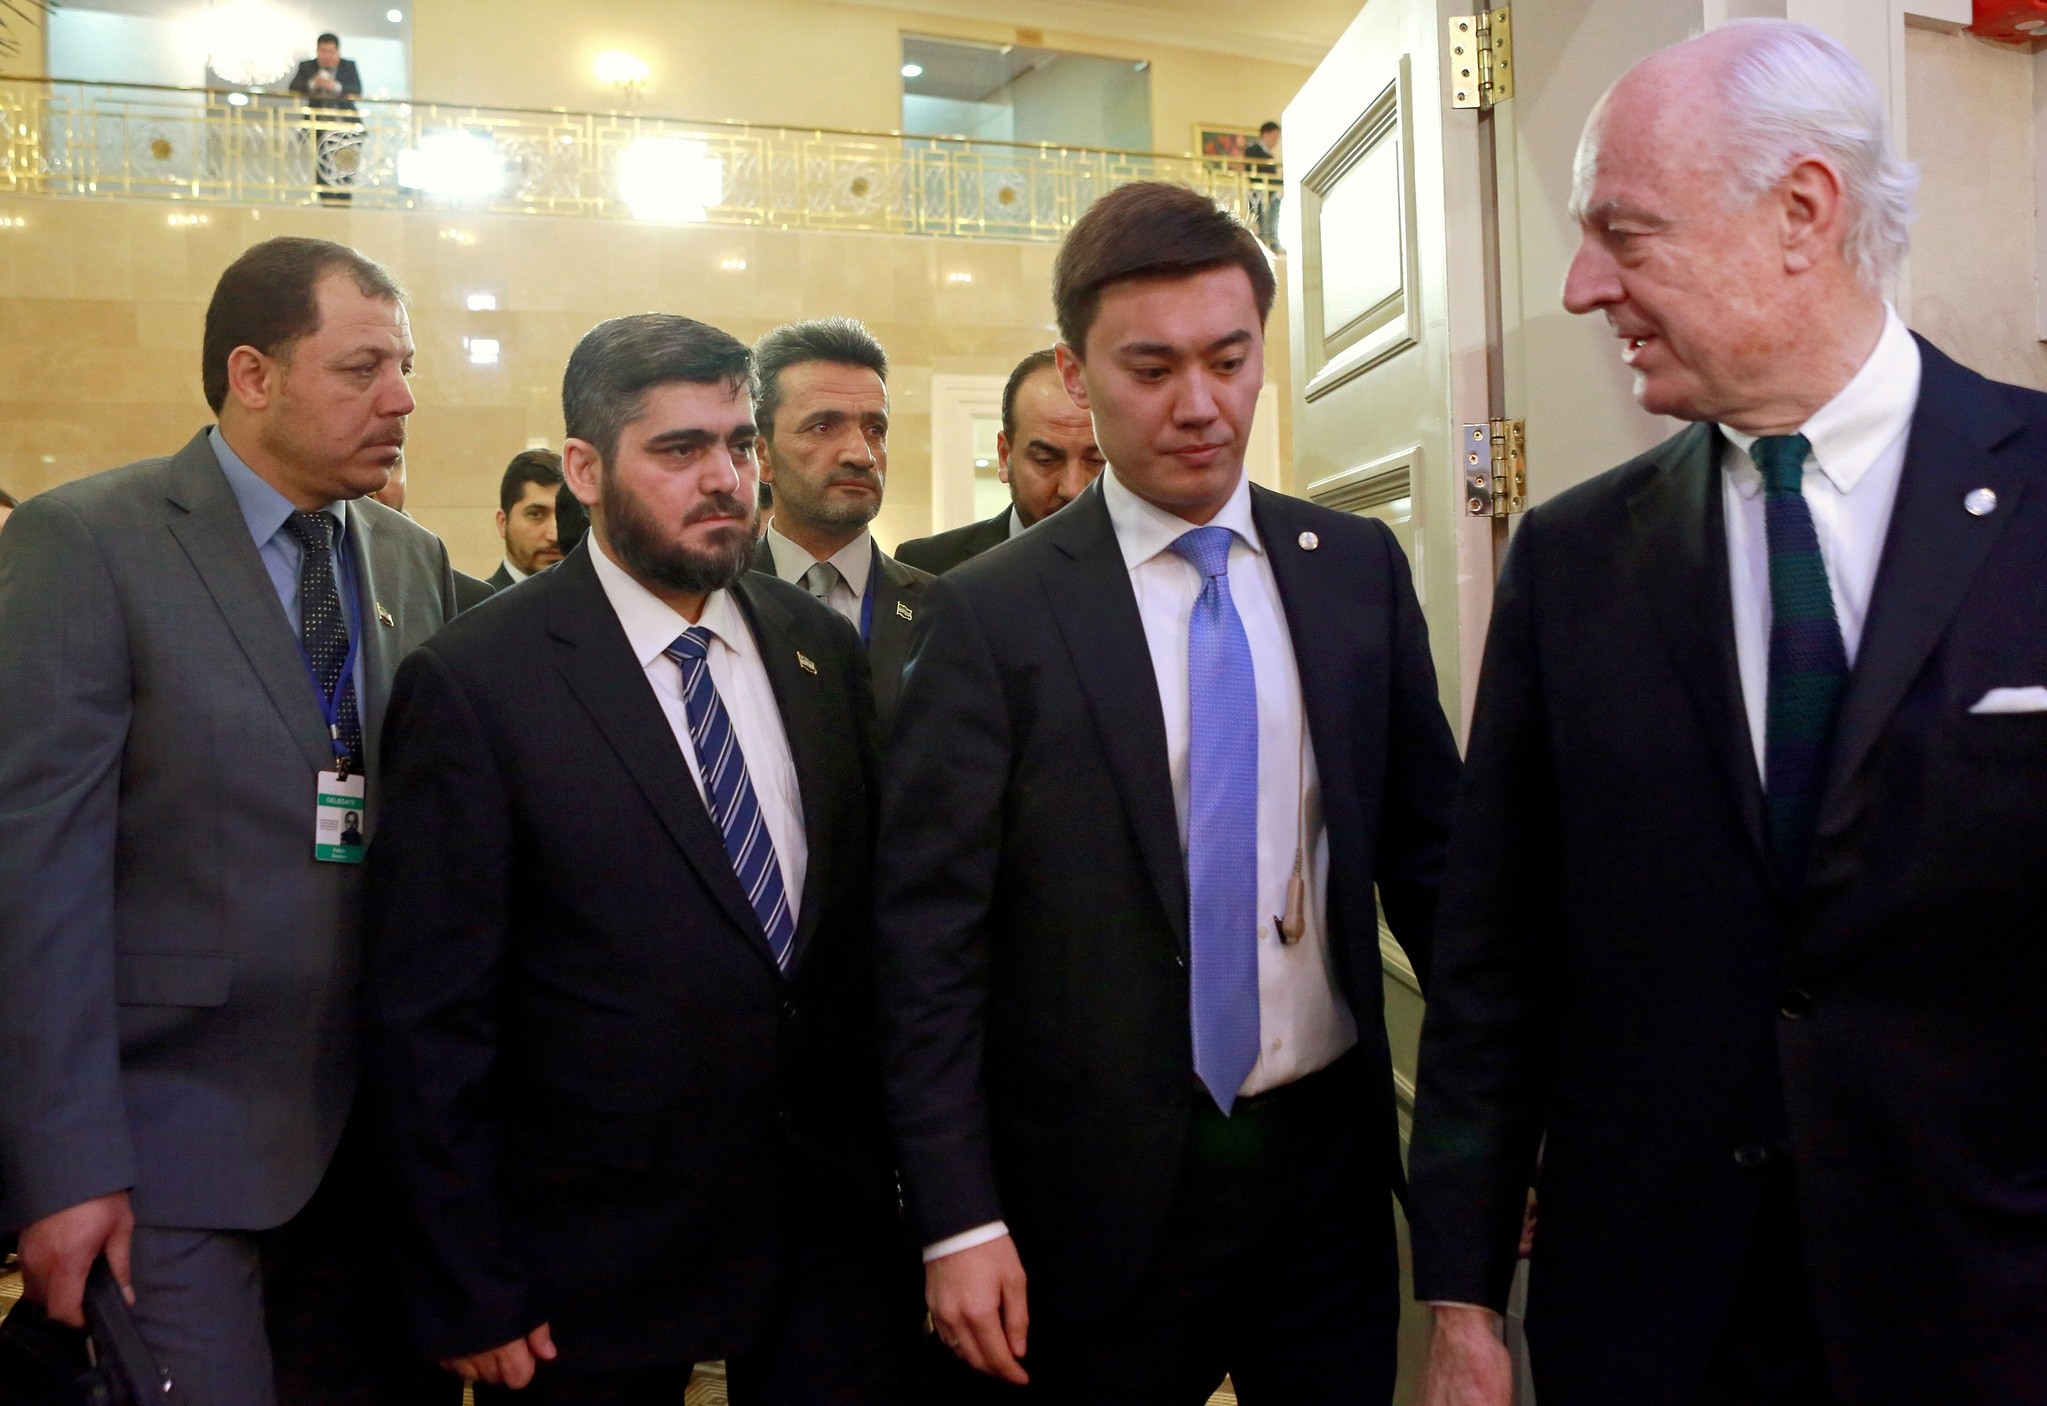  UN Special Envoy Staffan de Mistura (R) and Mohammed Alloush, the Syrian leader of the opposition delegation (L-2) arrive for talks on the Syrian conflict, Astana, Kazakhstan, 23 January 2017. (EPA Photo)